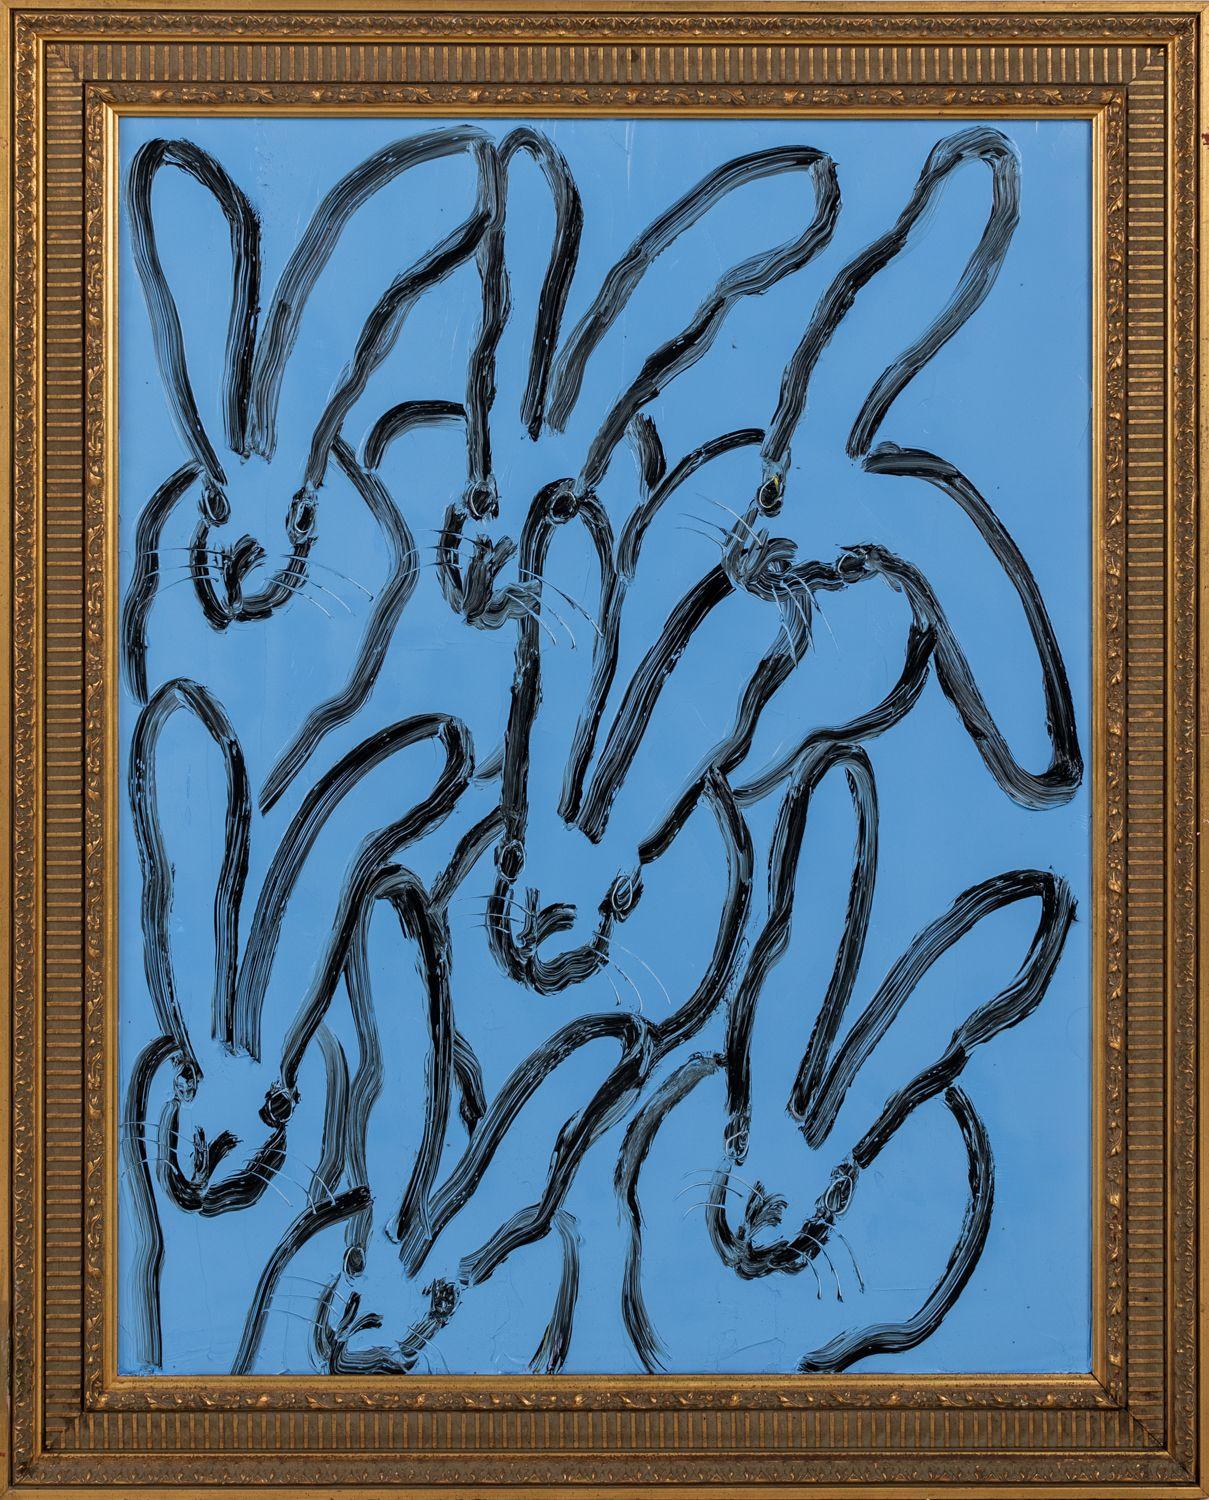 Hunt Slonem Animal Painting - Blue Tangle 7 "Bunny Painting" Original Oil Painting in Gold Vintage Frame